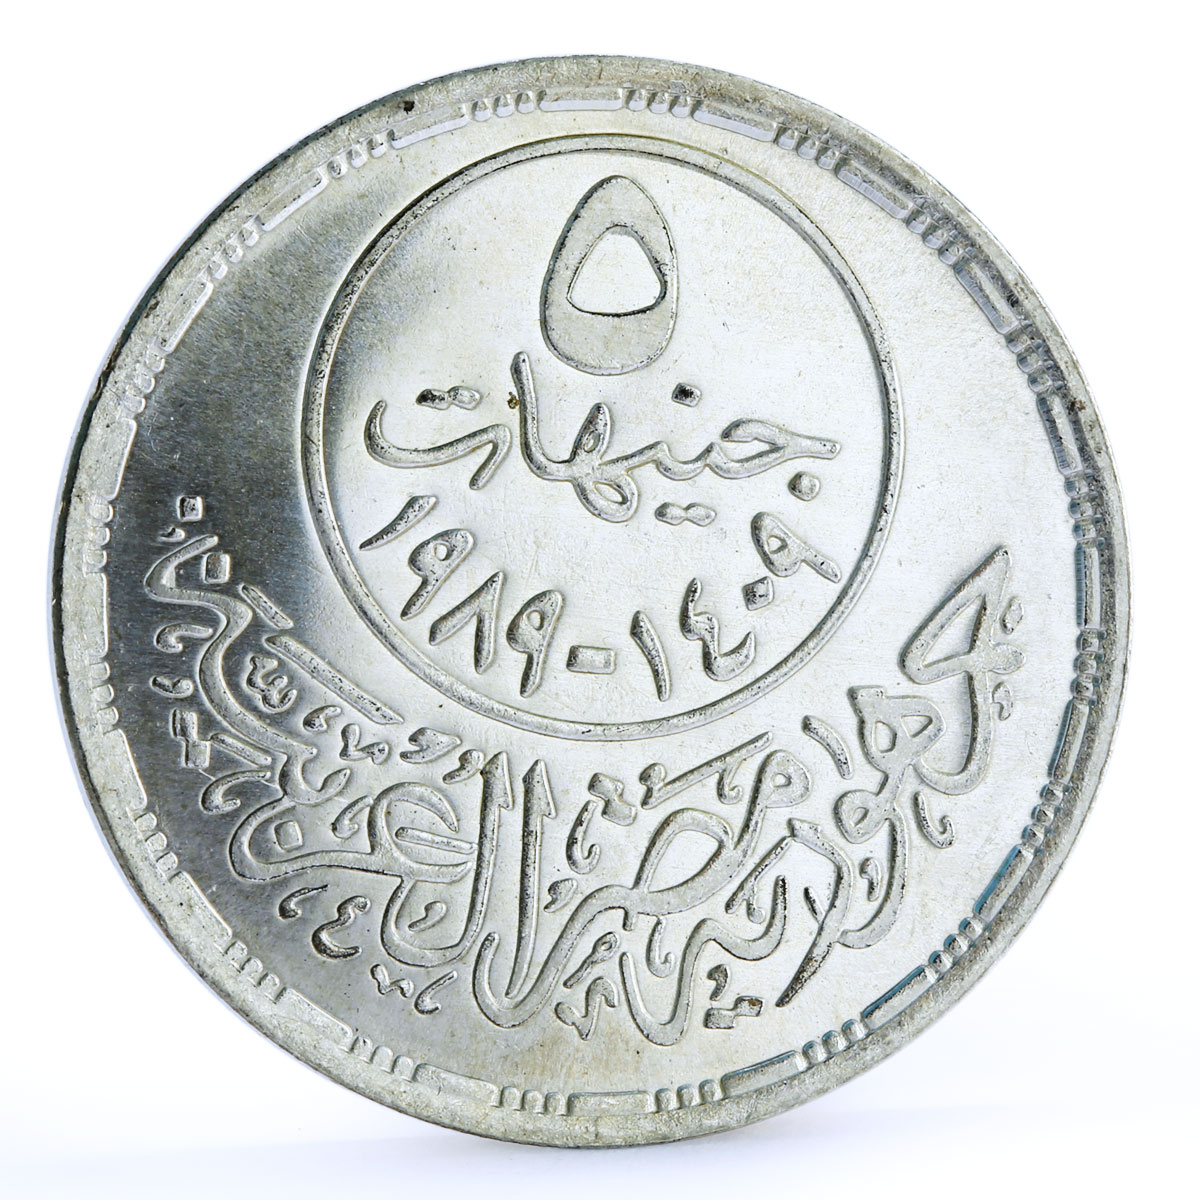 Egypt 5 pounds National Health Insurance People Crescent Moon silver coin 1989